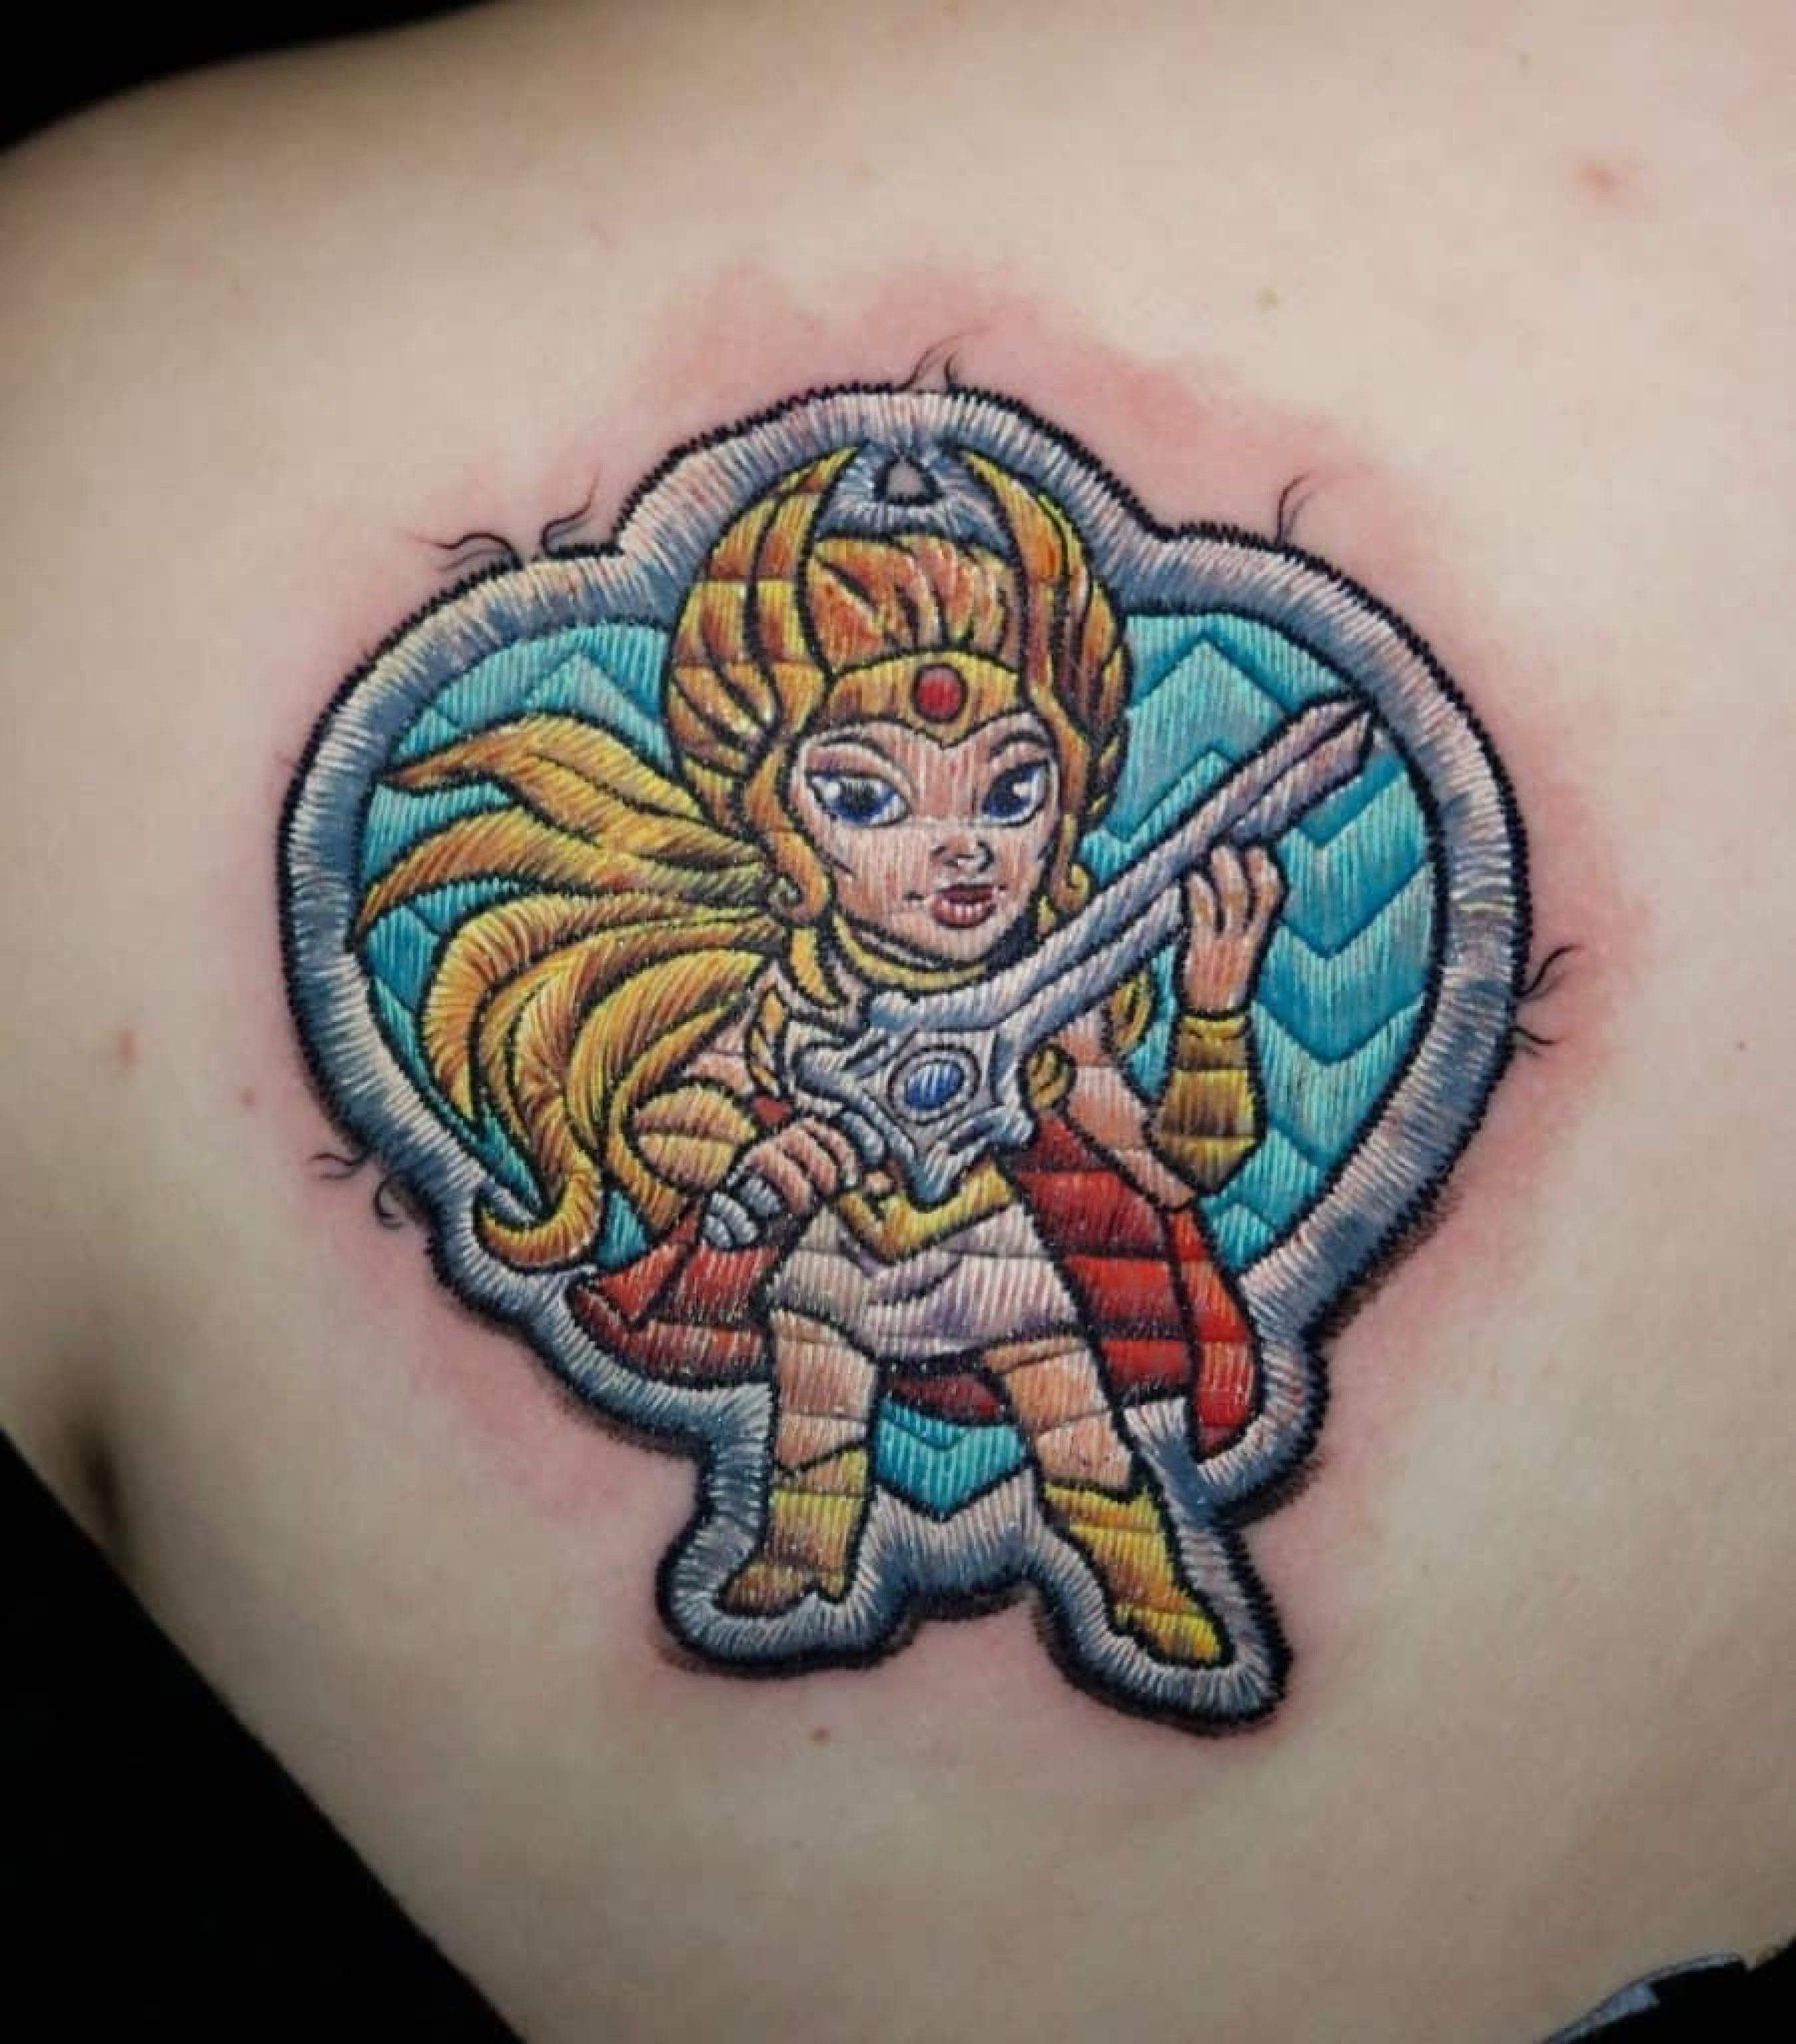 patch tattoo of she-ra